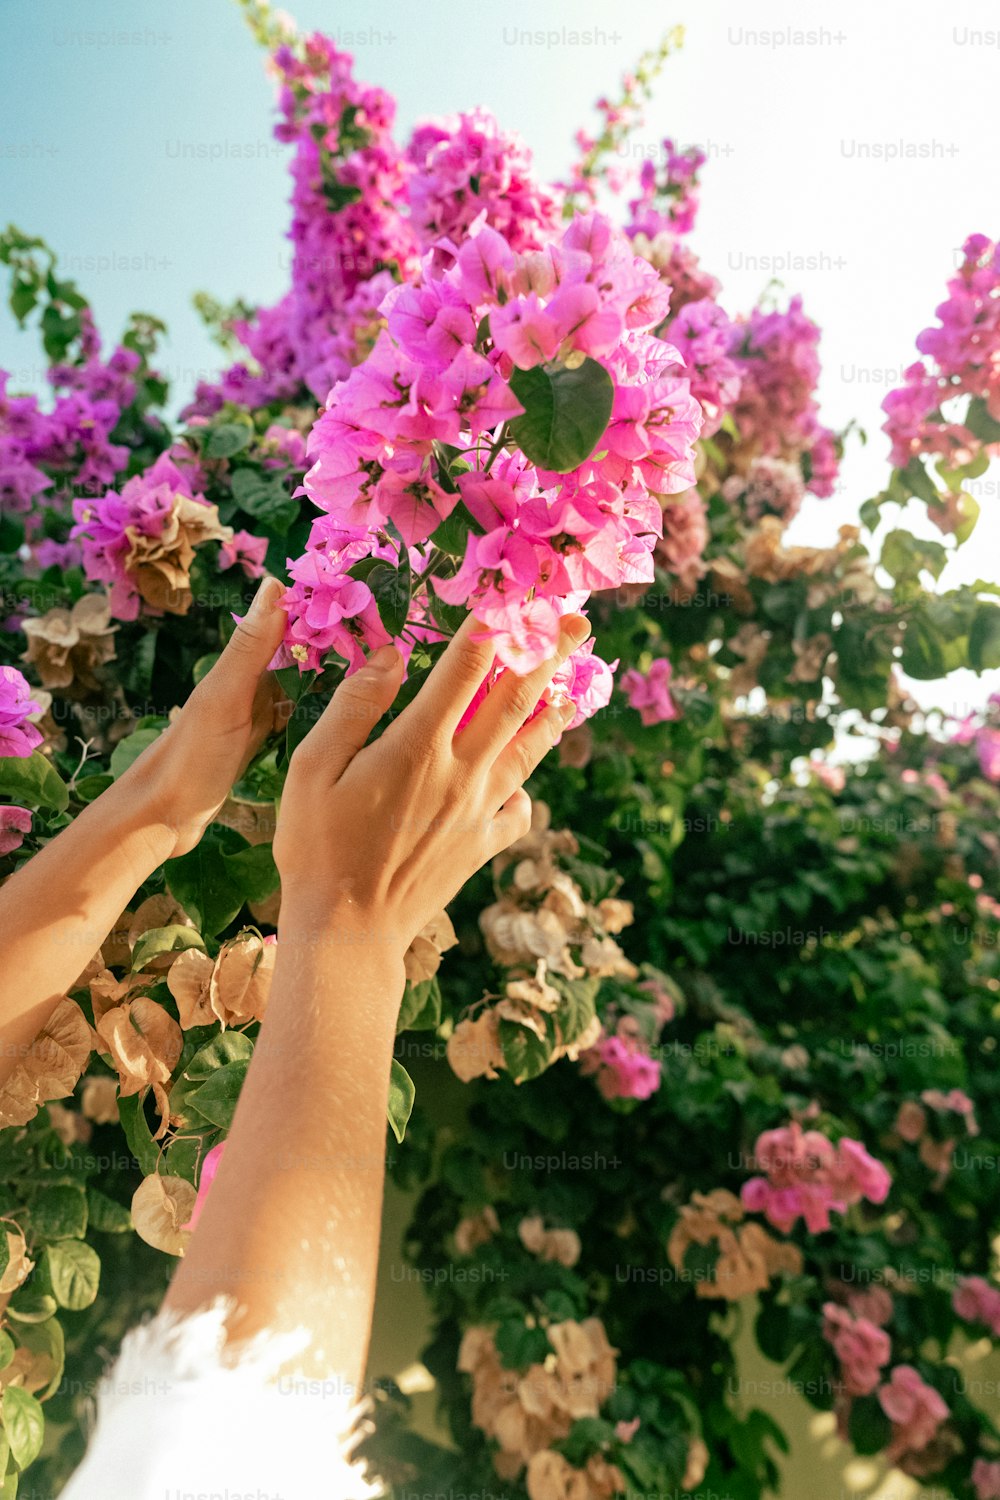 two hands reaching up to a bunch of flowers